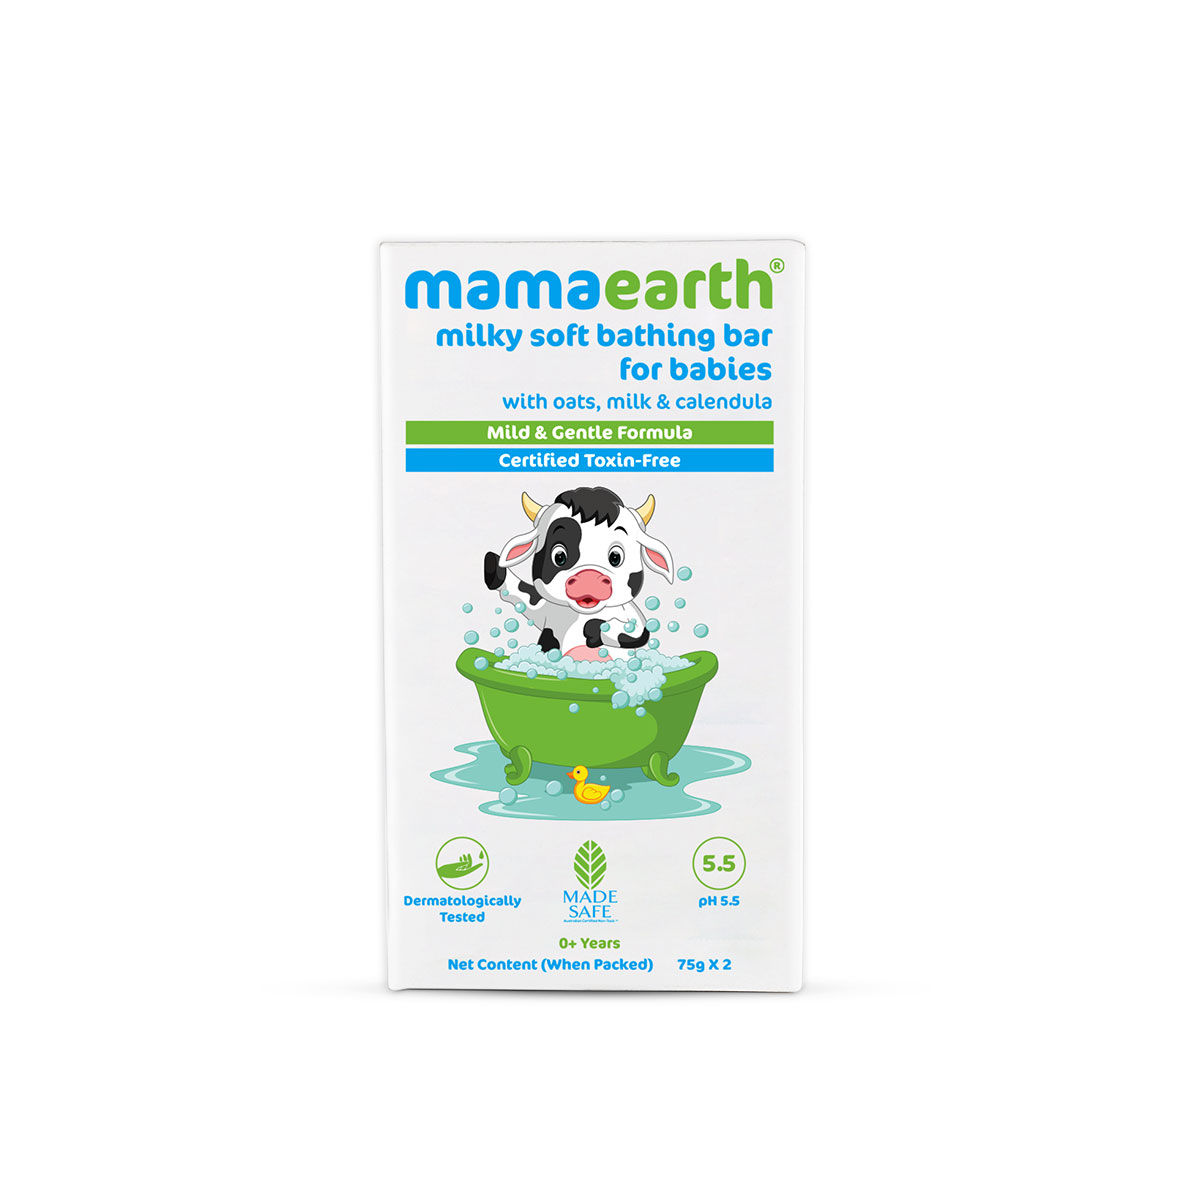 Buy Mamaearth Milky Soft Bathing Bar with Oats, Milk and Calendula for Babies - 75g x 2 - Purplle